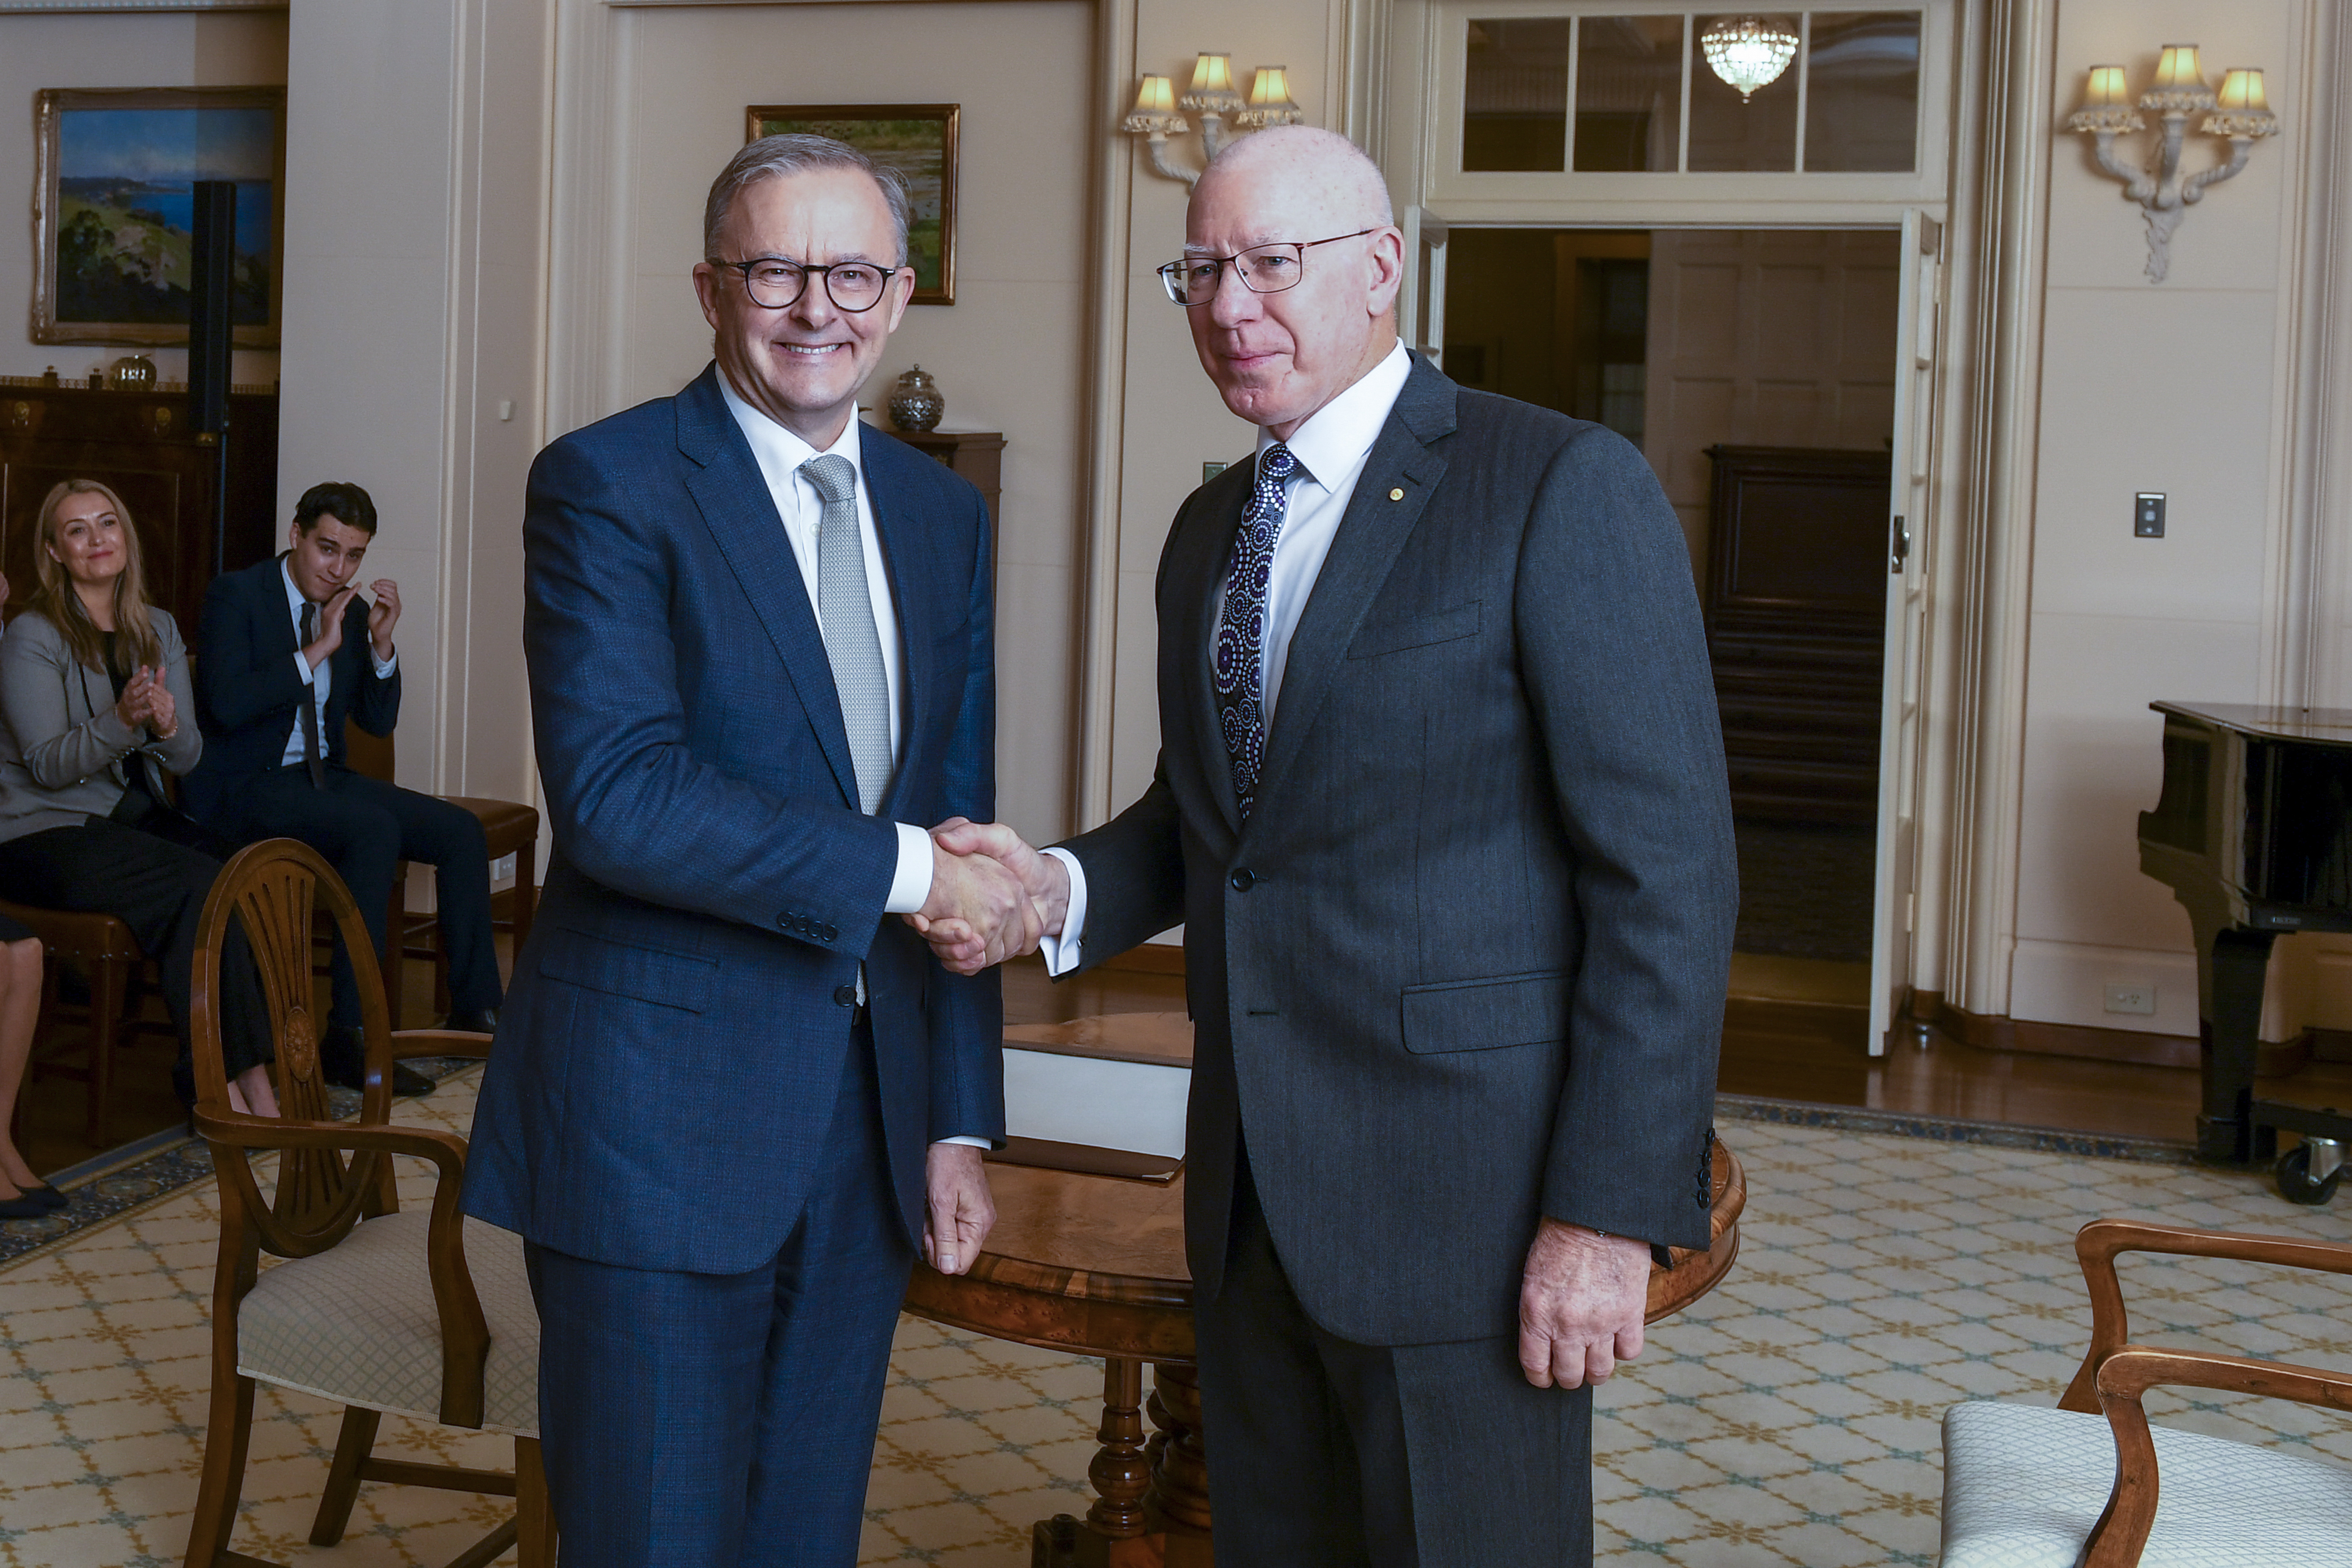 Australian Prime Minister Anthony Albanese, left, is congratulated by Australian Governor-General David Hurley after his swearing in ceremony at Government House in Canberra